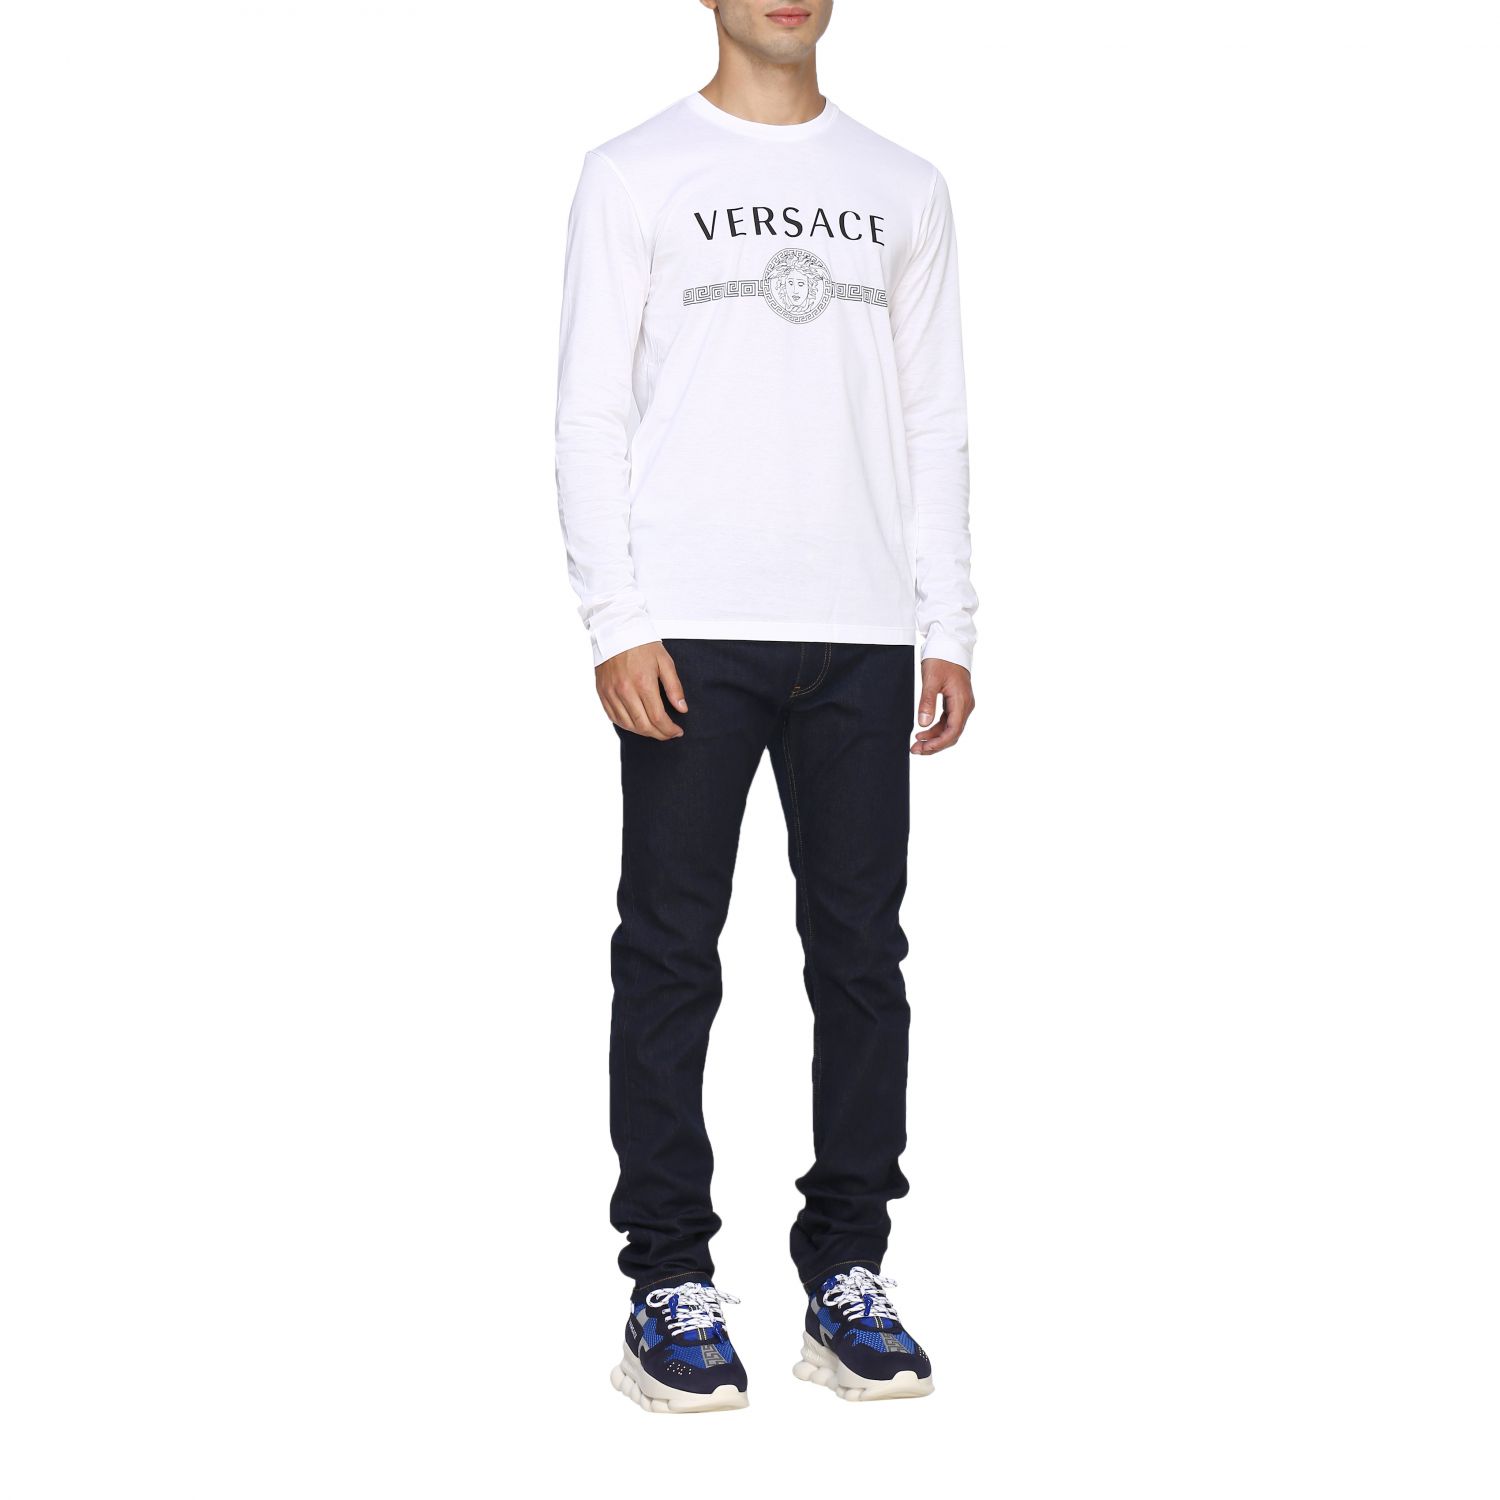 Versace Outlet: t-shirt for man - White | Versace t-shirt A83580 ...